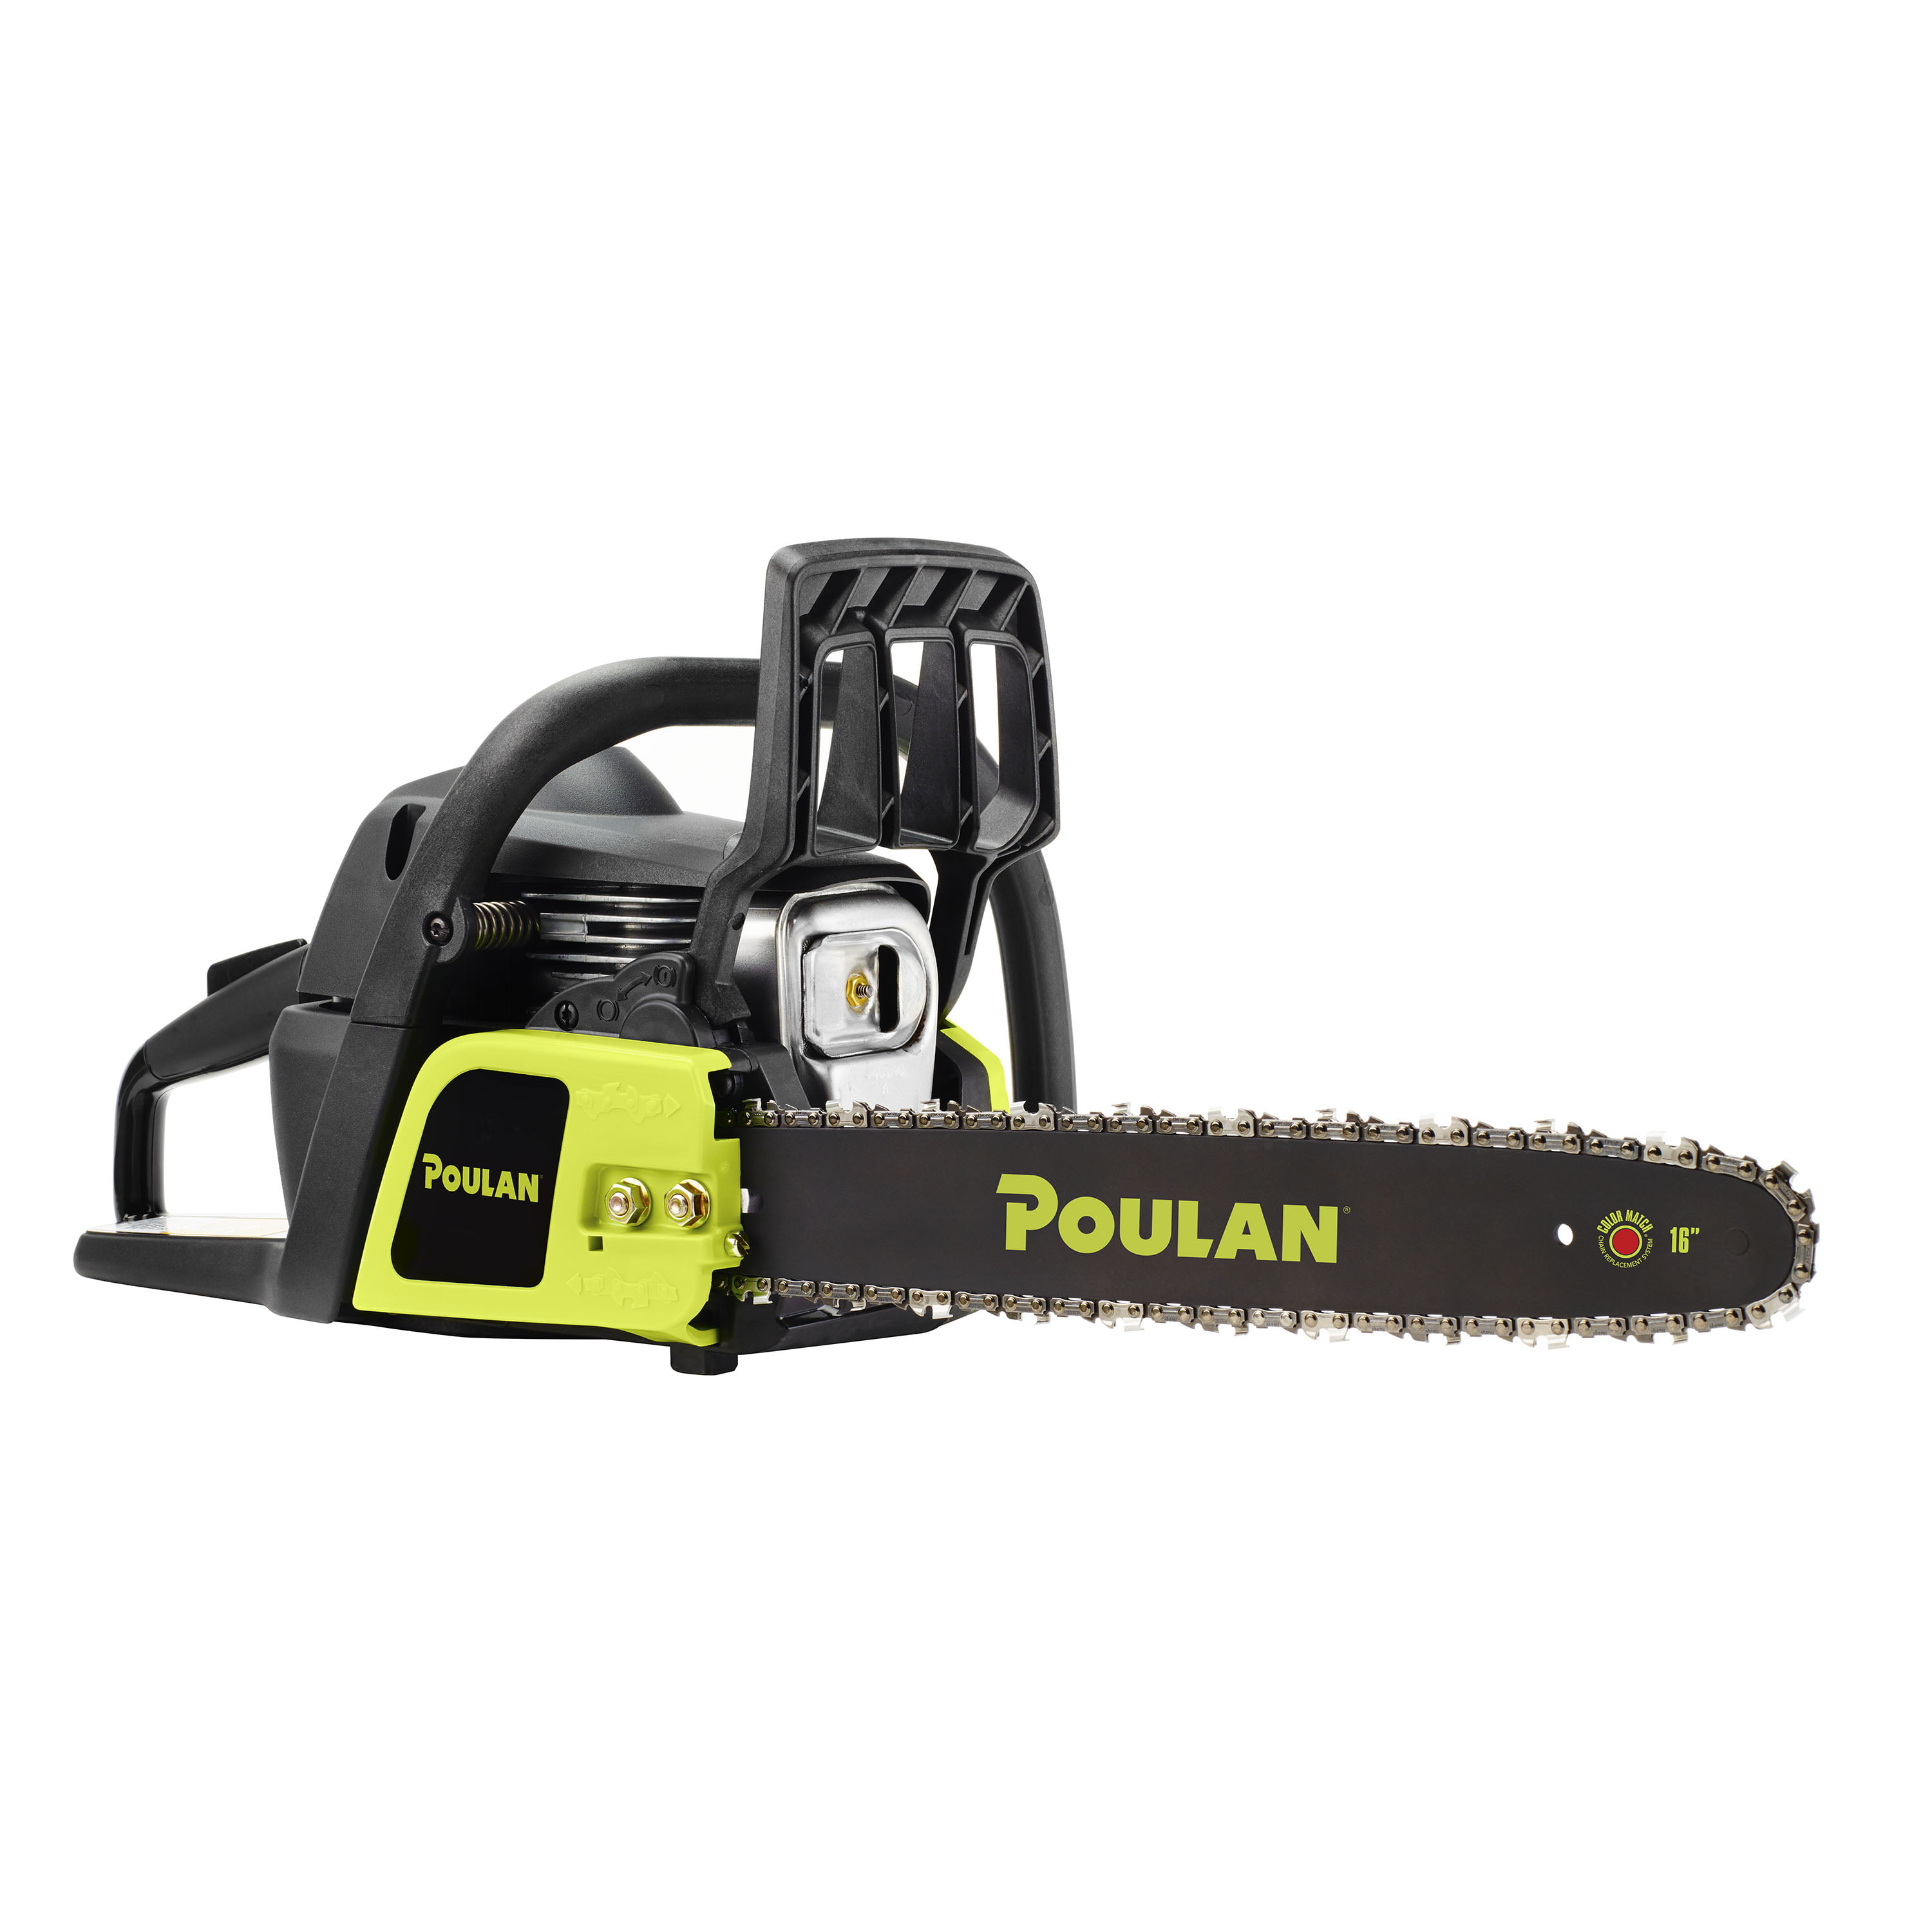 Certified Refurbished Poulan Pro PP4218A 18 Inch 42CC 2 Cycle Gas Chainsaw